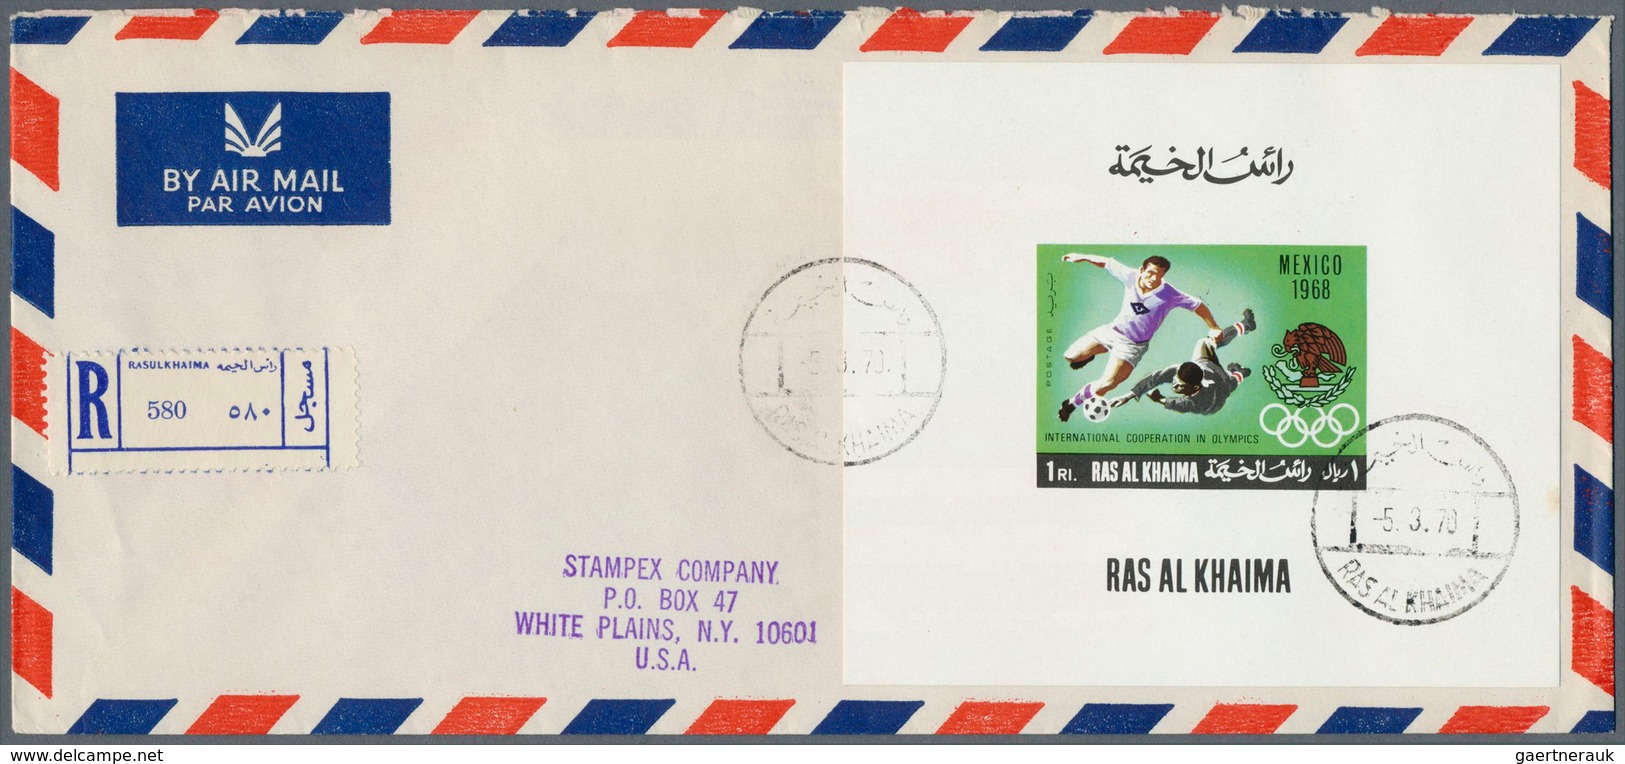 Thematik: Olympische Spiele / olympic games: 1969, Ras al Khaima, Olympic Games Cooperation, five re